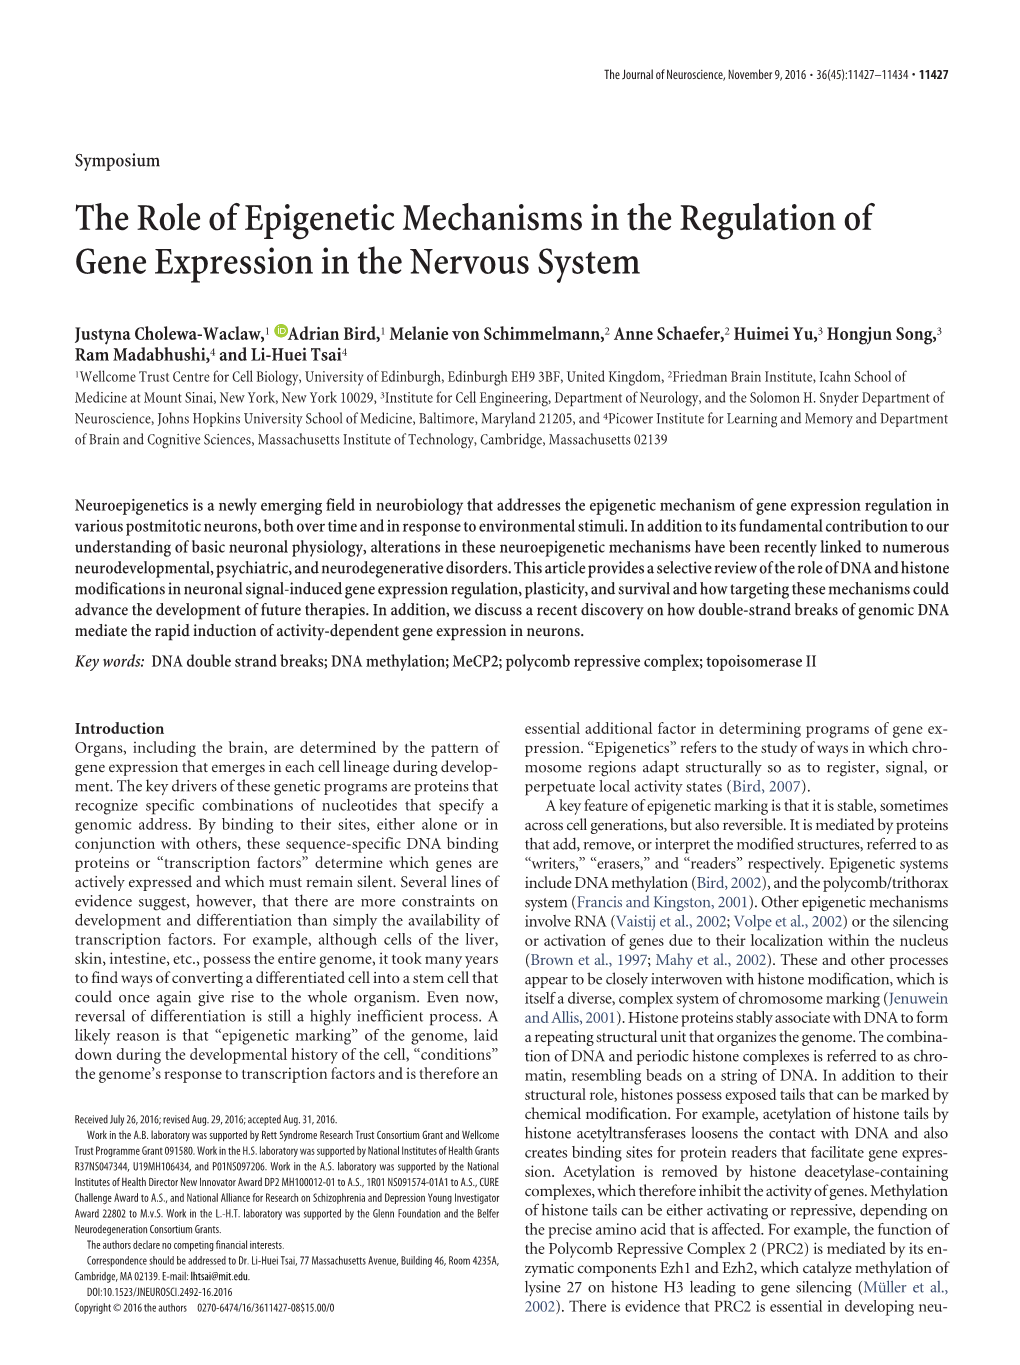 The Role of Epigenetic Mechanisms in the Regulation of Gene Expression in the Nervous System